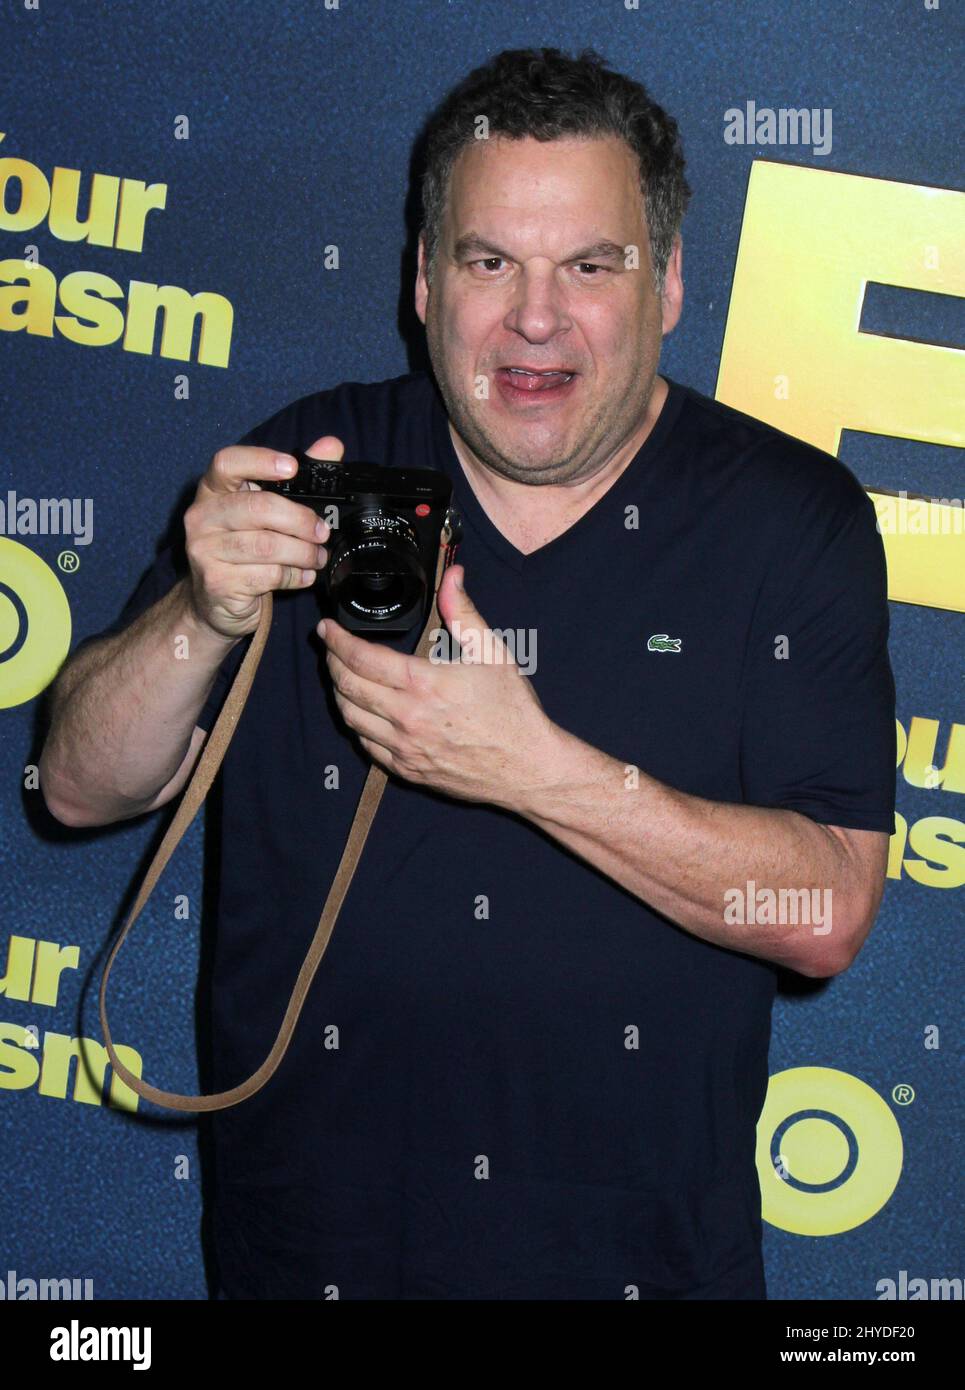 Jeff Garlin attending 'Curb Your Enthusiasm' Season 9 Premiere Held at the SVA Theater on September 27, 2017 Stock Photo